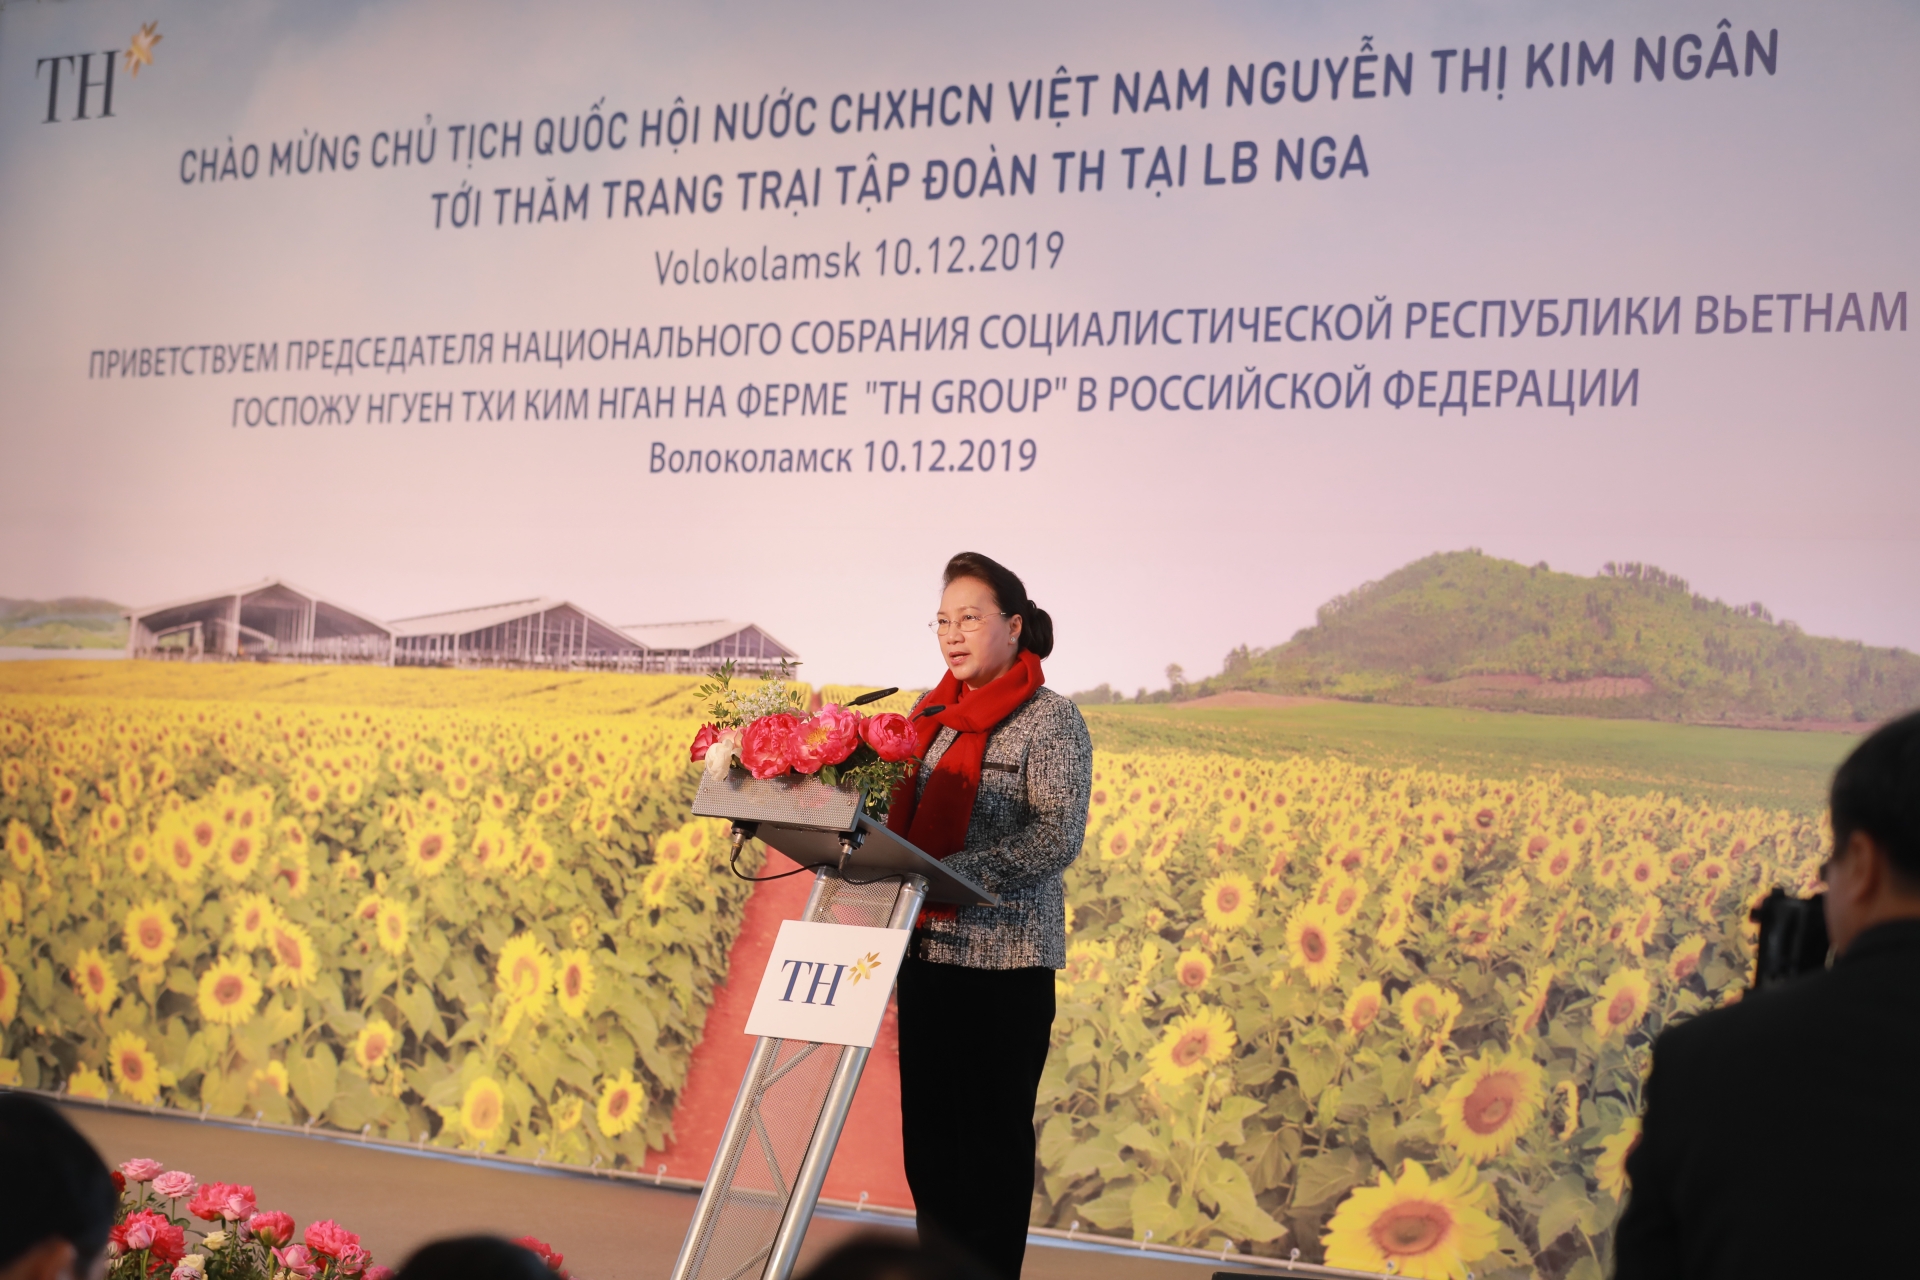 National Assembly leader visits TH Group’s project in Russia